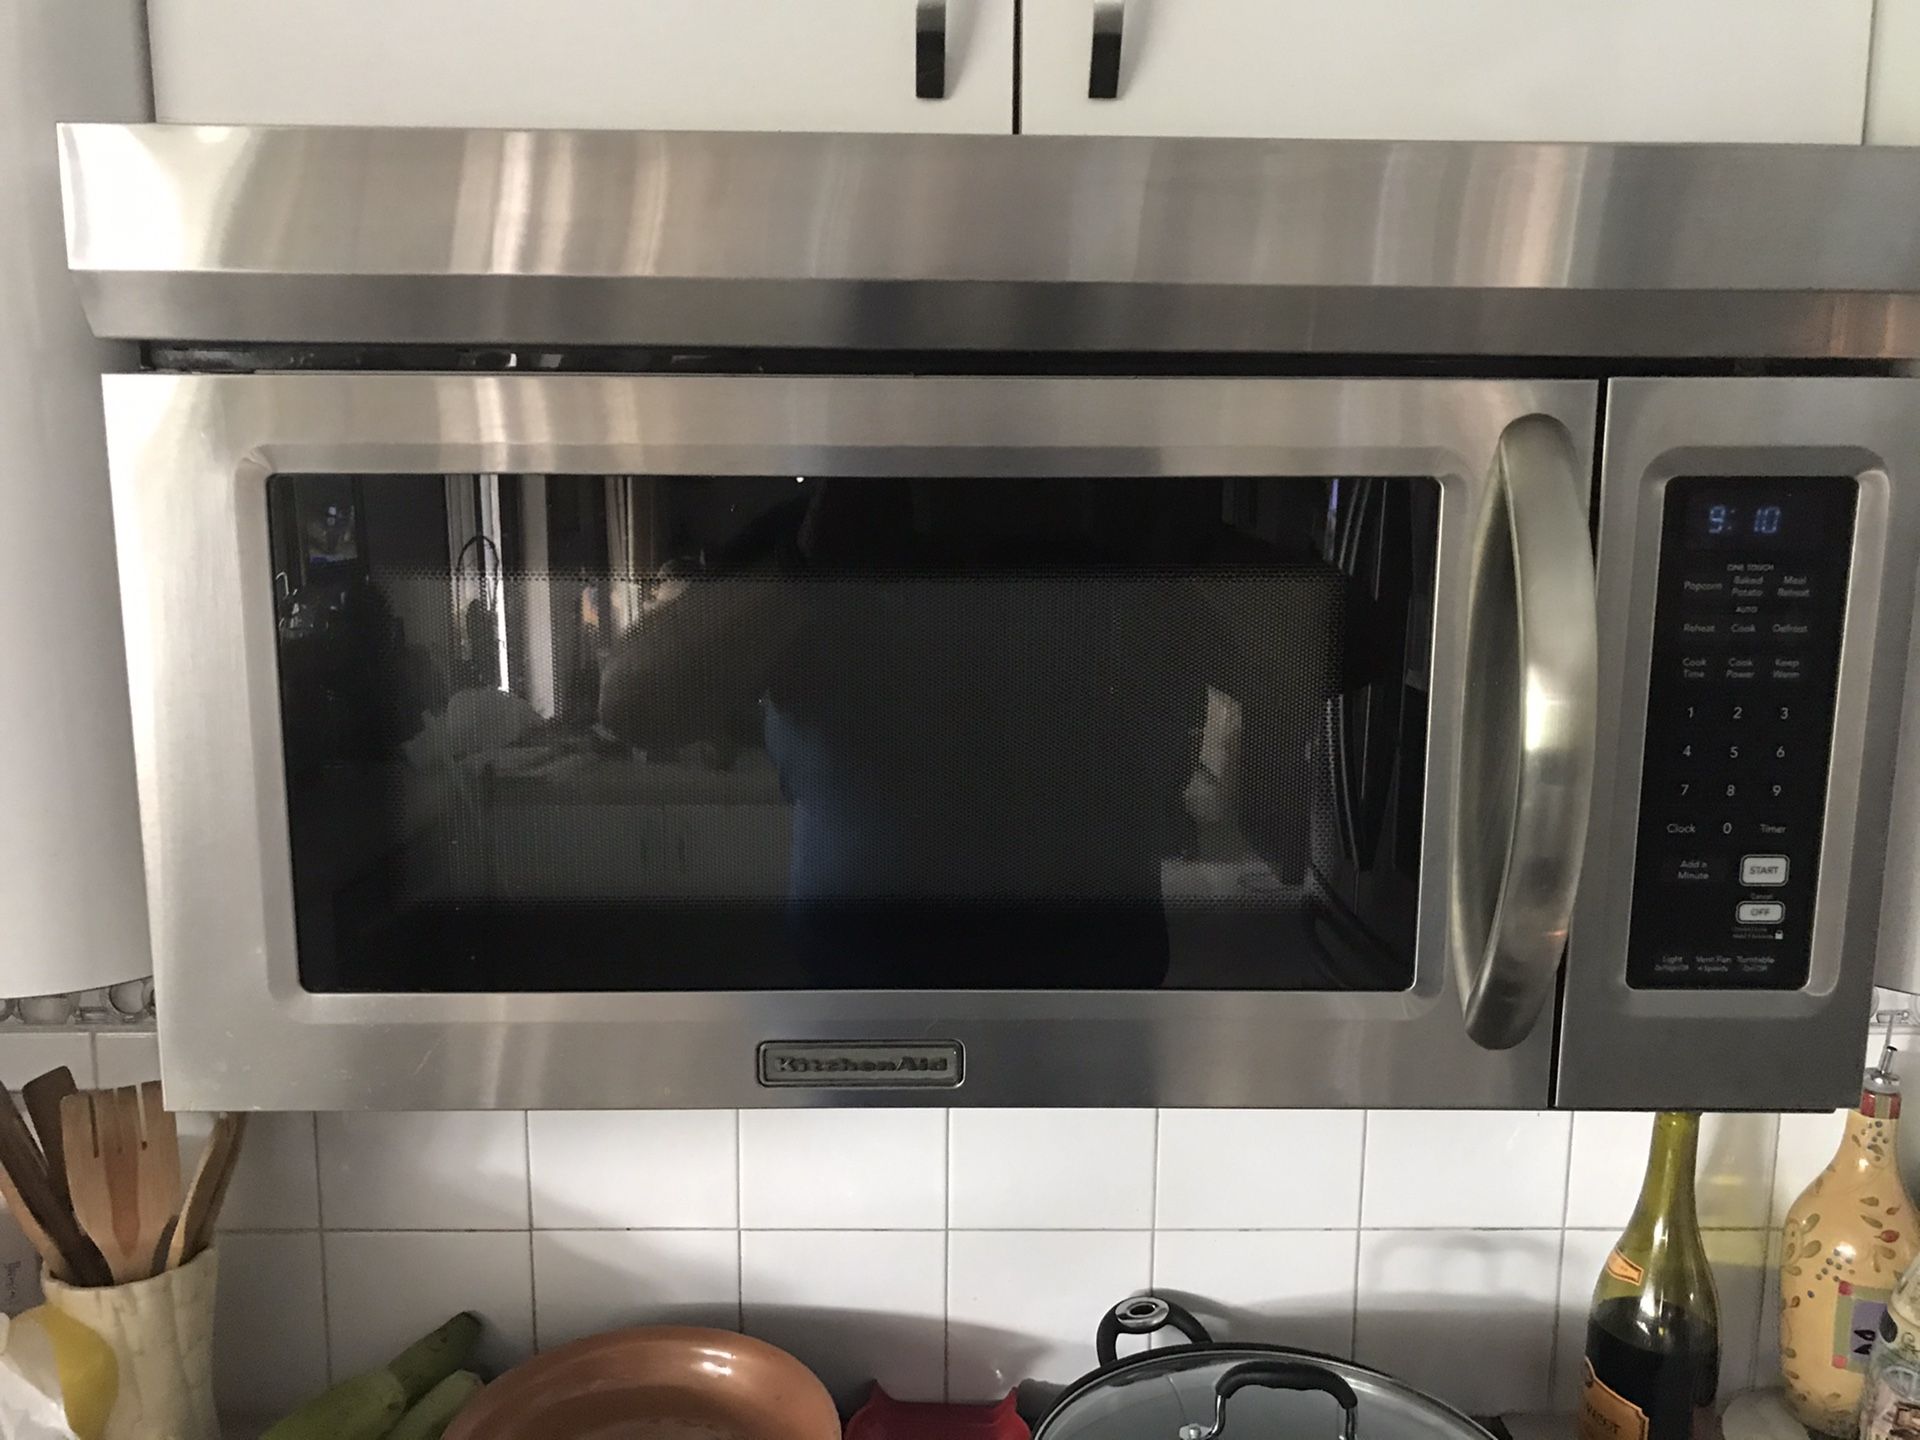 Kitchen Aid Stainless Steel Microwave Oven!